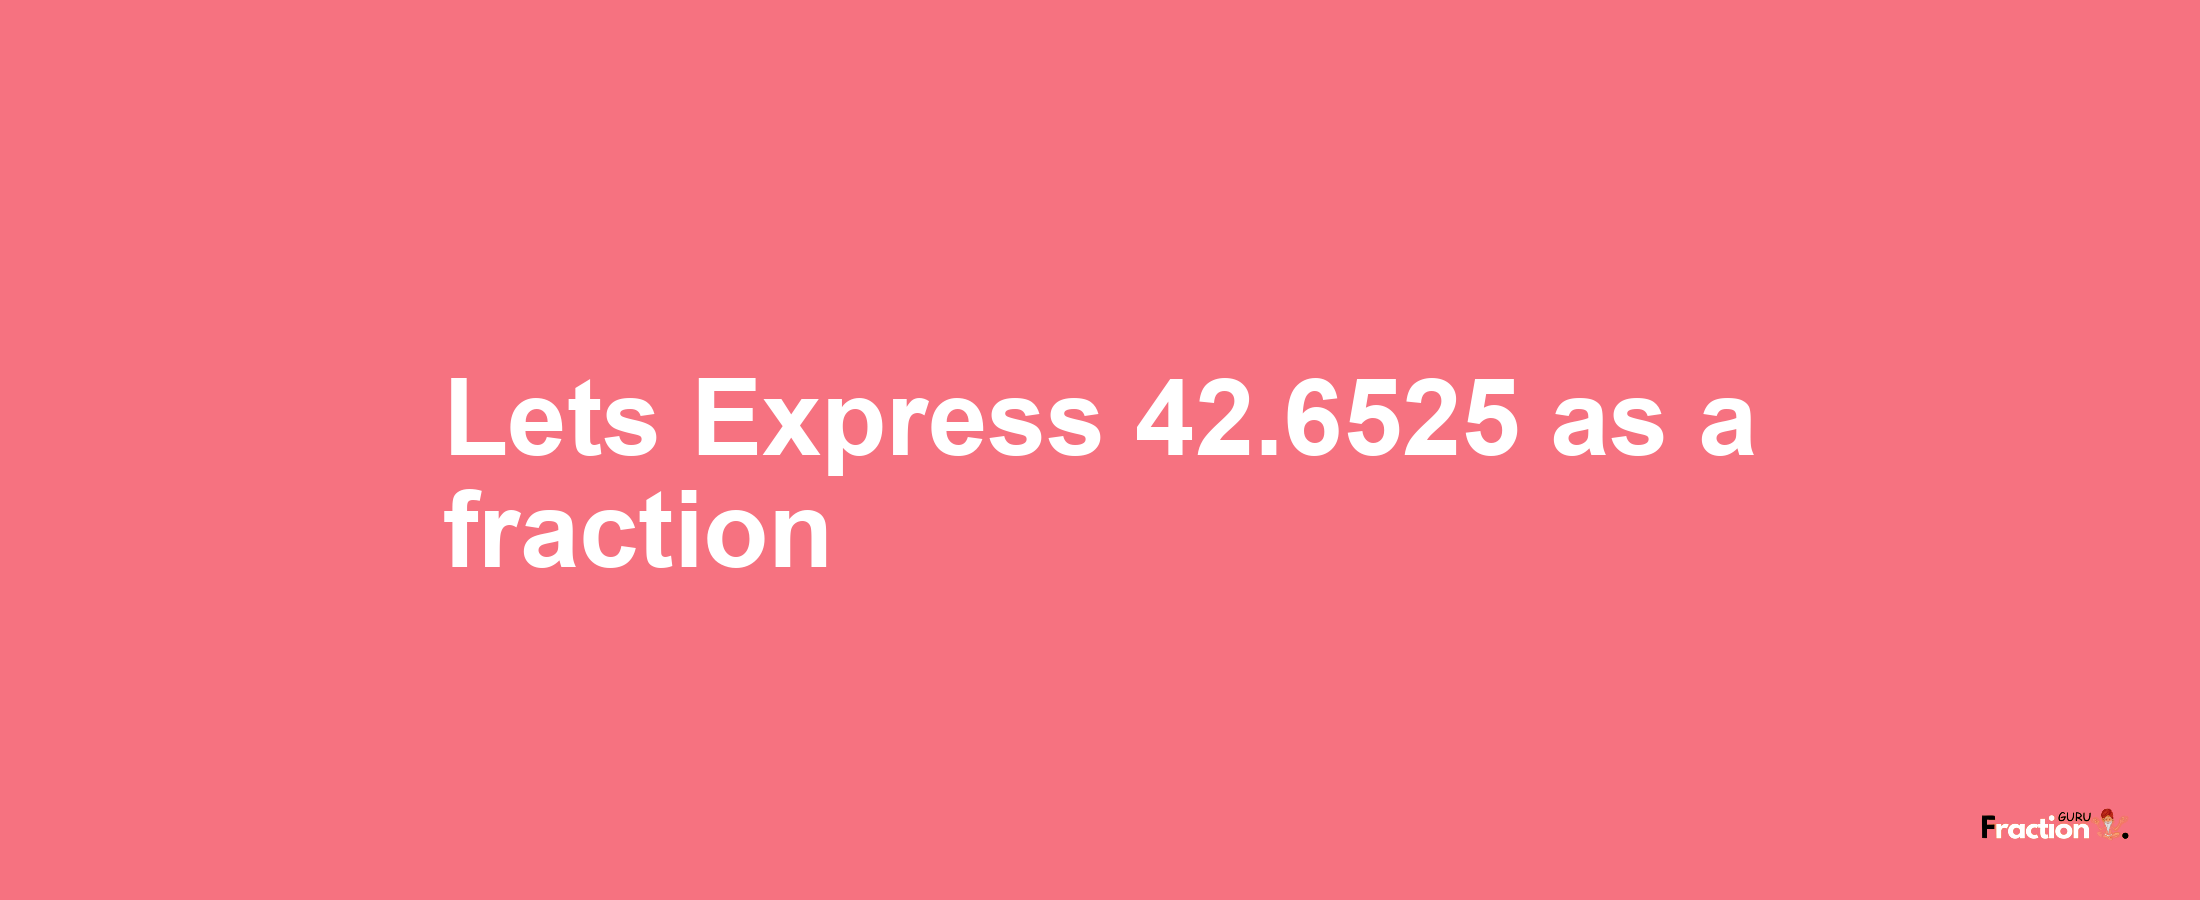 Lets Express 42.6525 as afraction